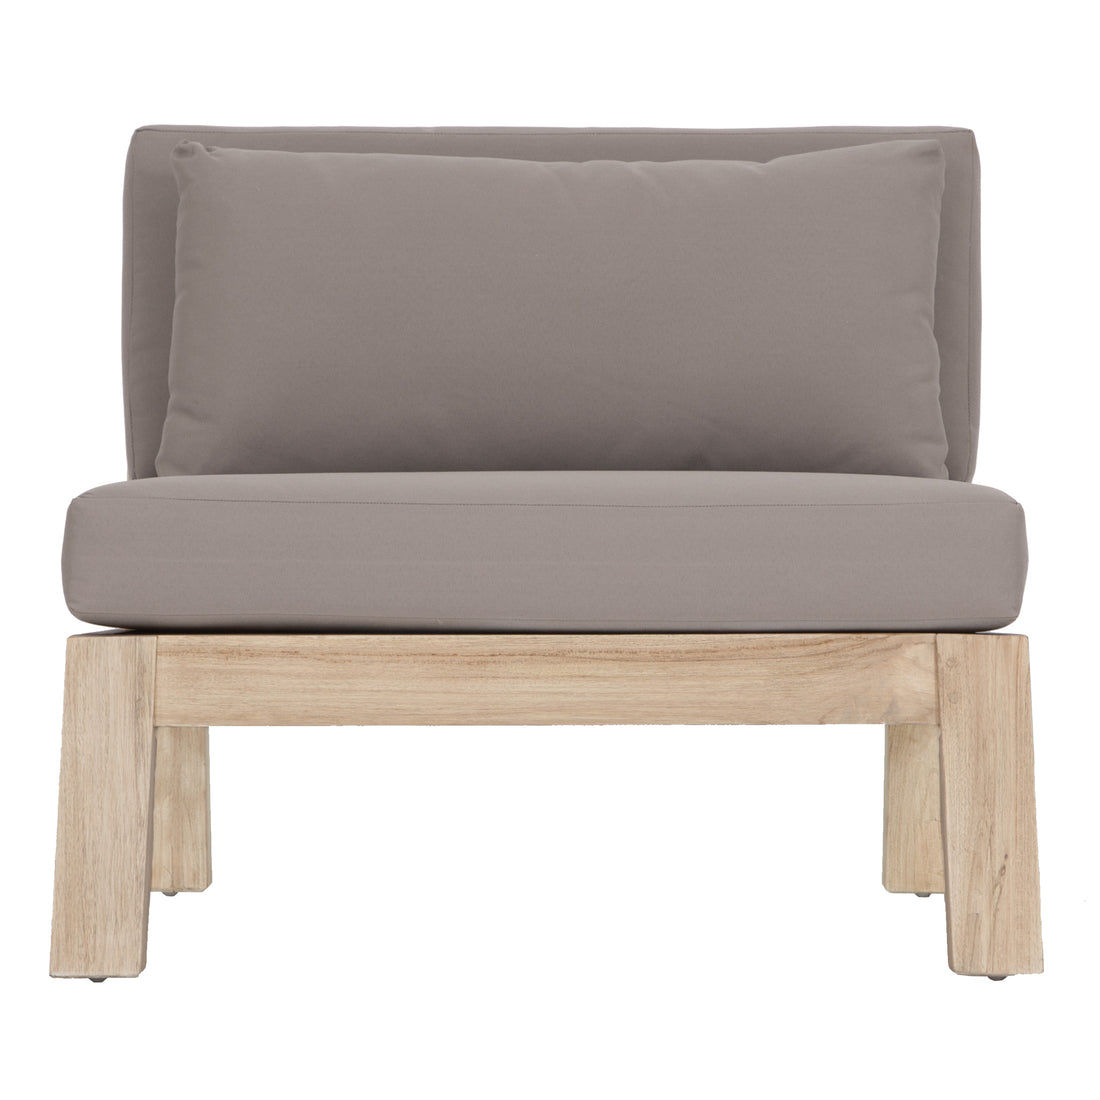 Harper Armless Outdoor Sofa | One Seater - Uniqwa Collections wholesale furniture suppliers for interior designers australia